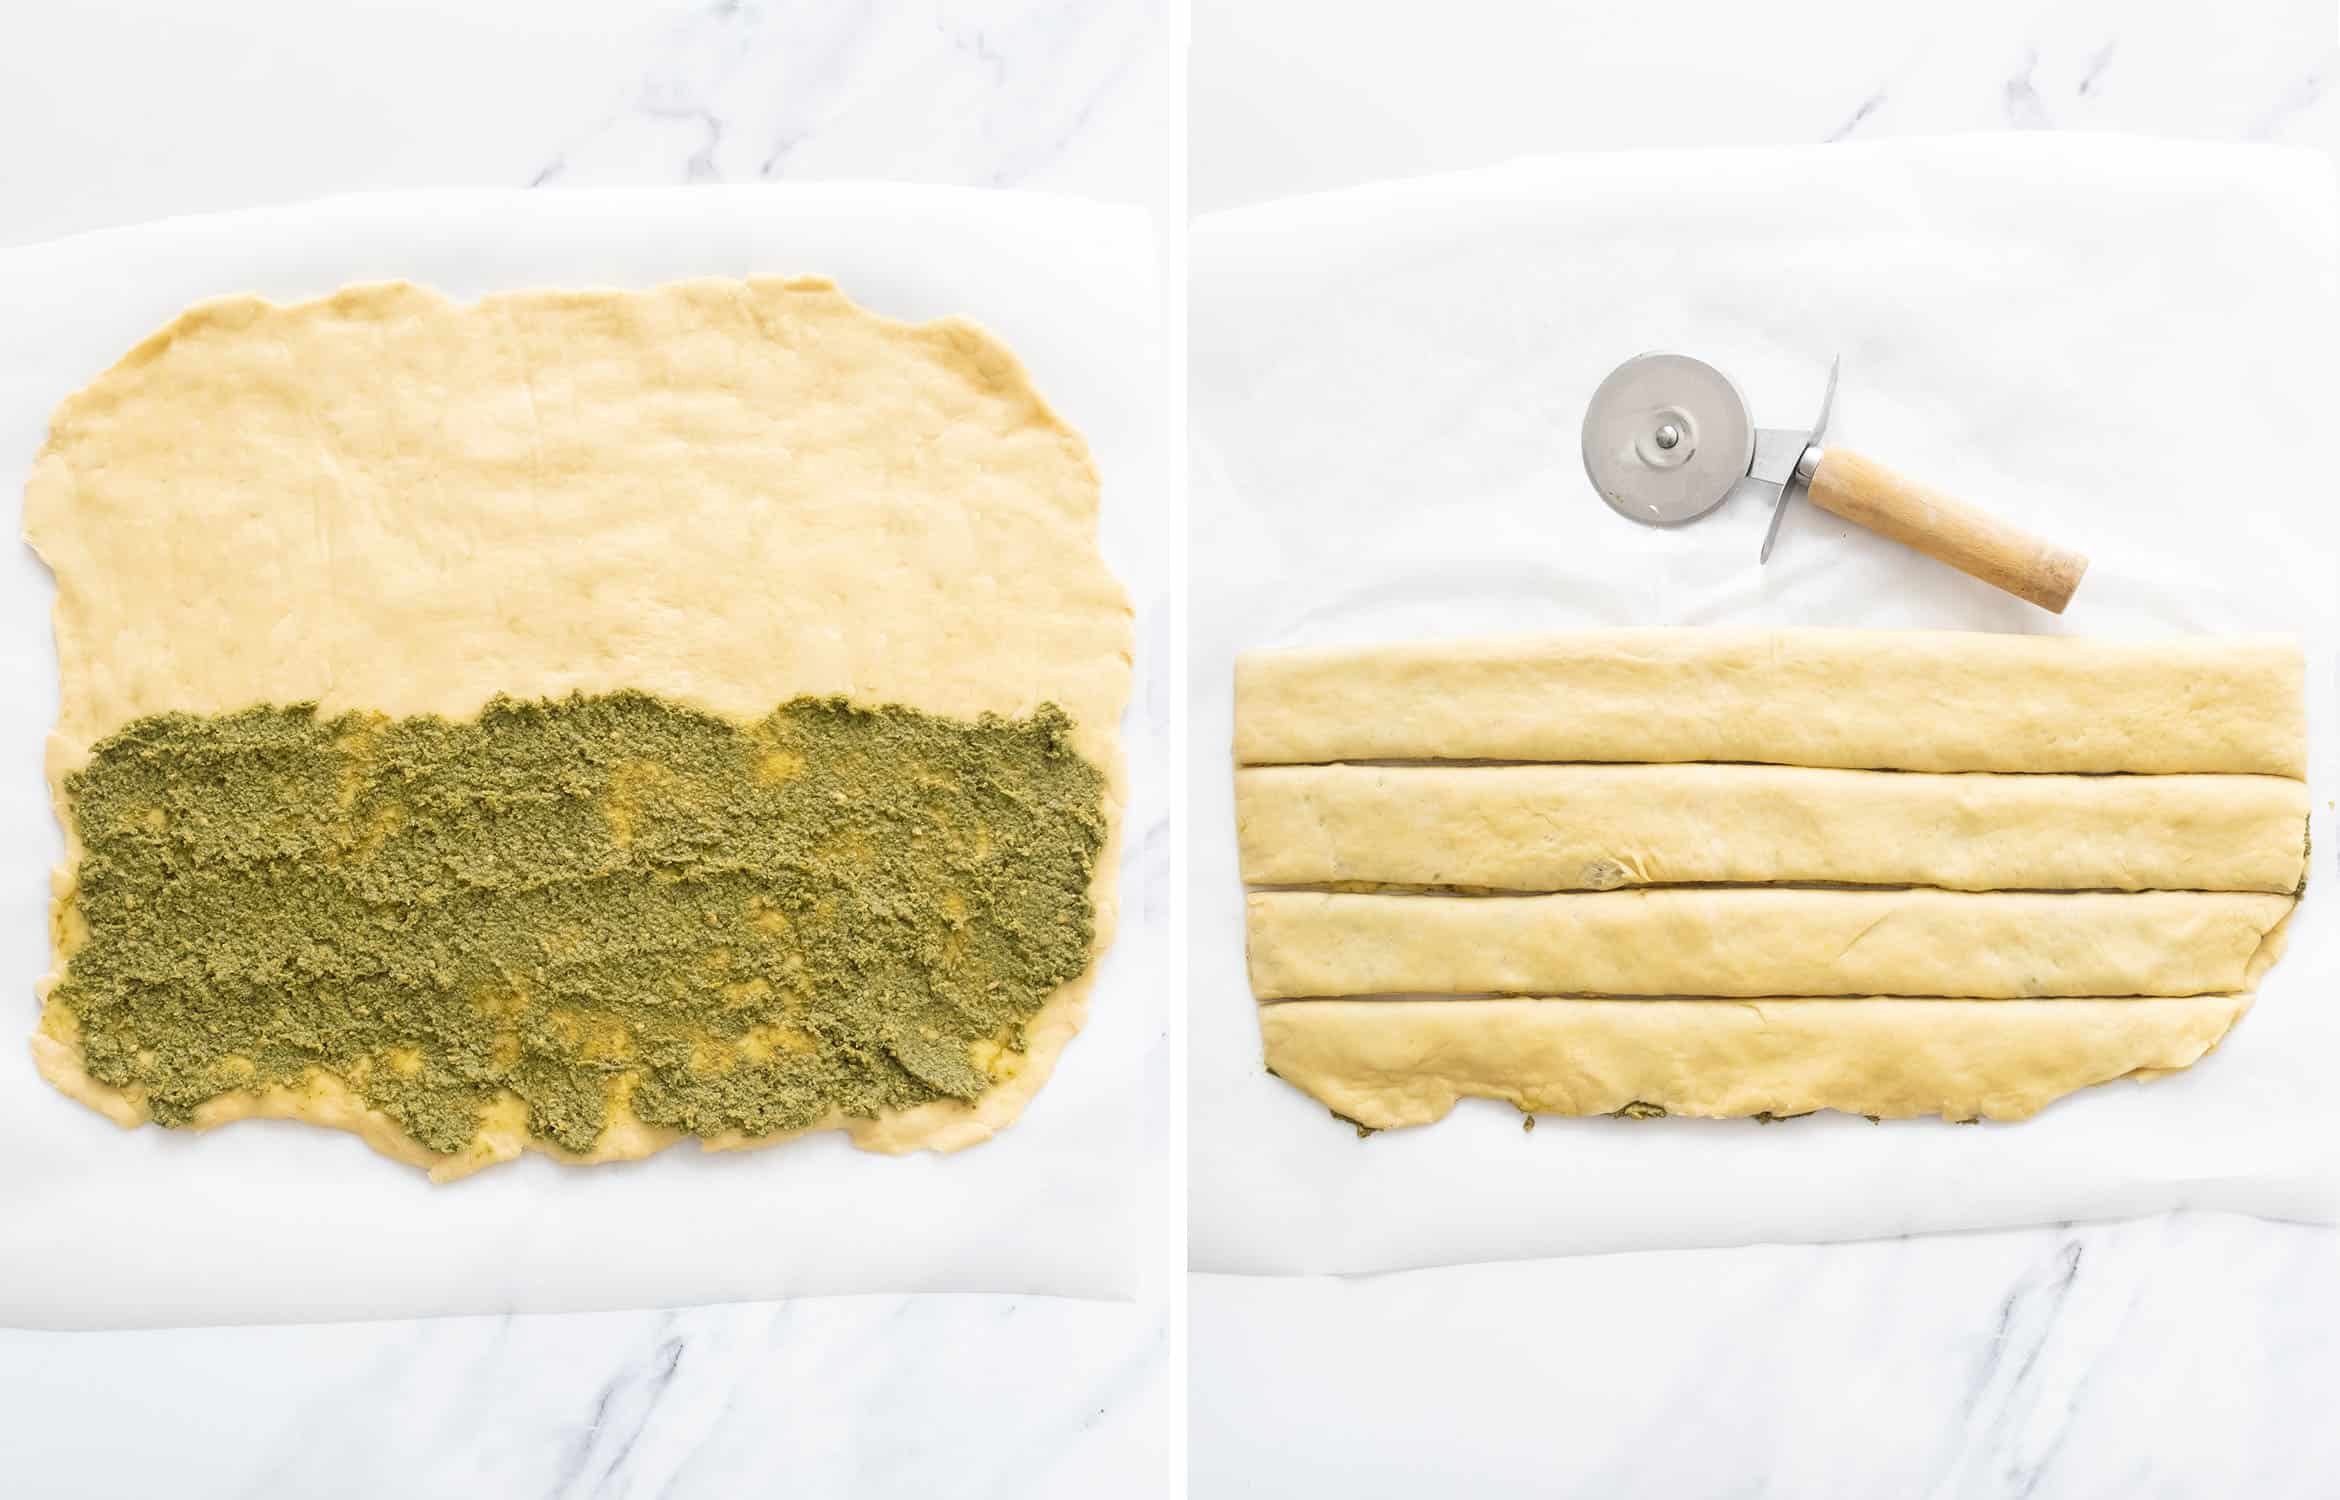 Top view of the pesto bread dough flatten and covered with a layer of garlicky pesto, and cut into four slices with a pizza cutter.